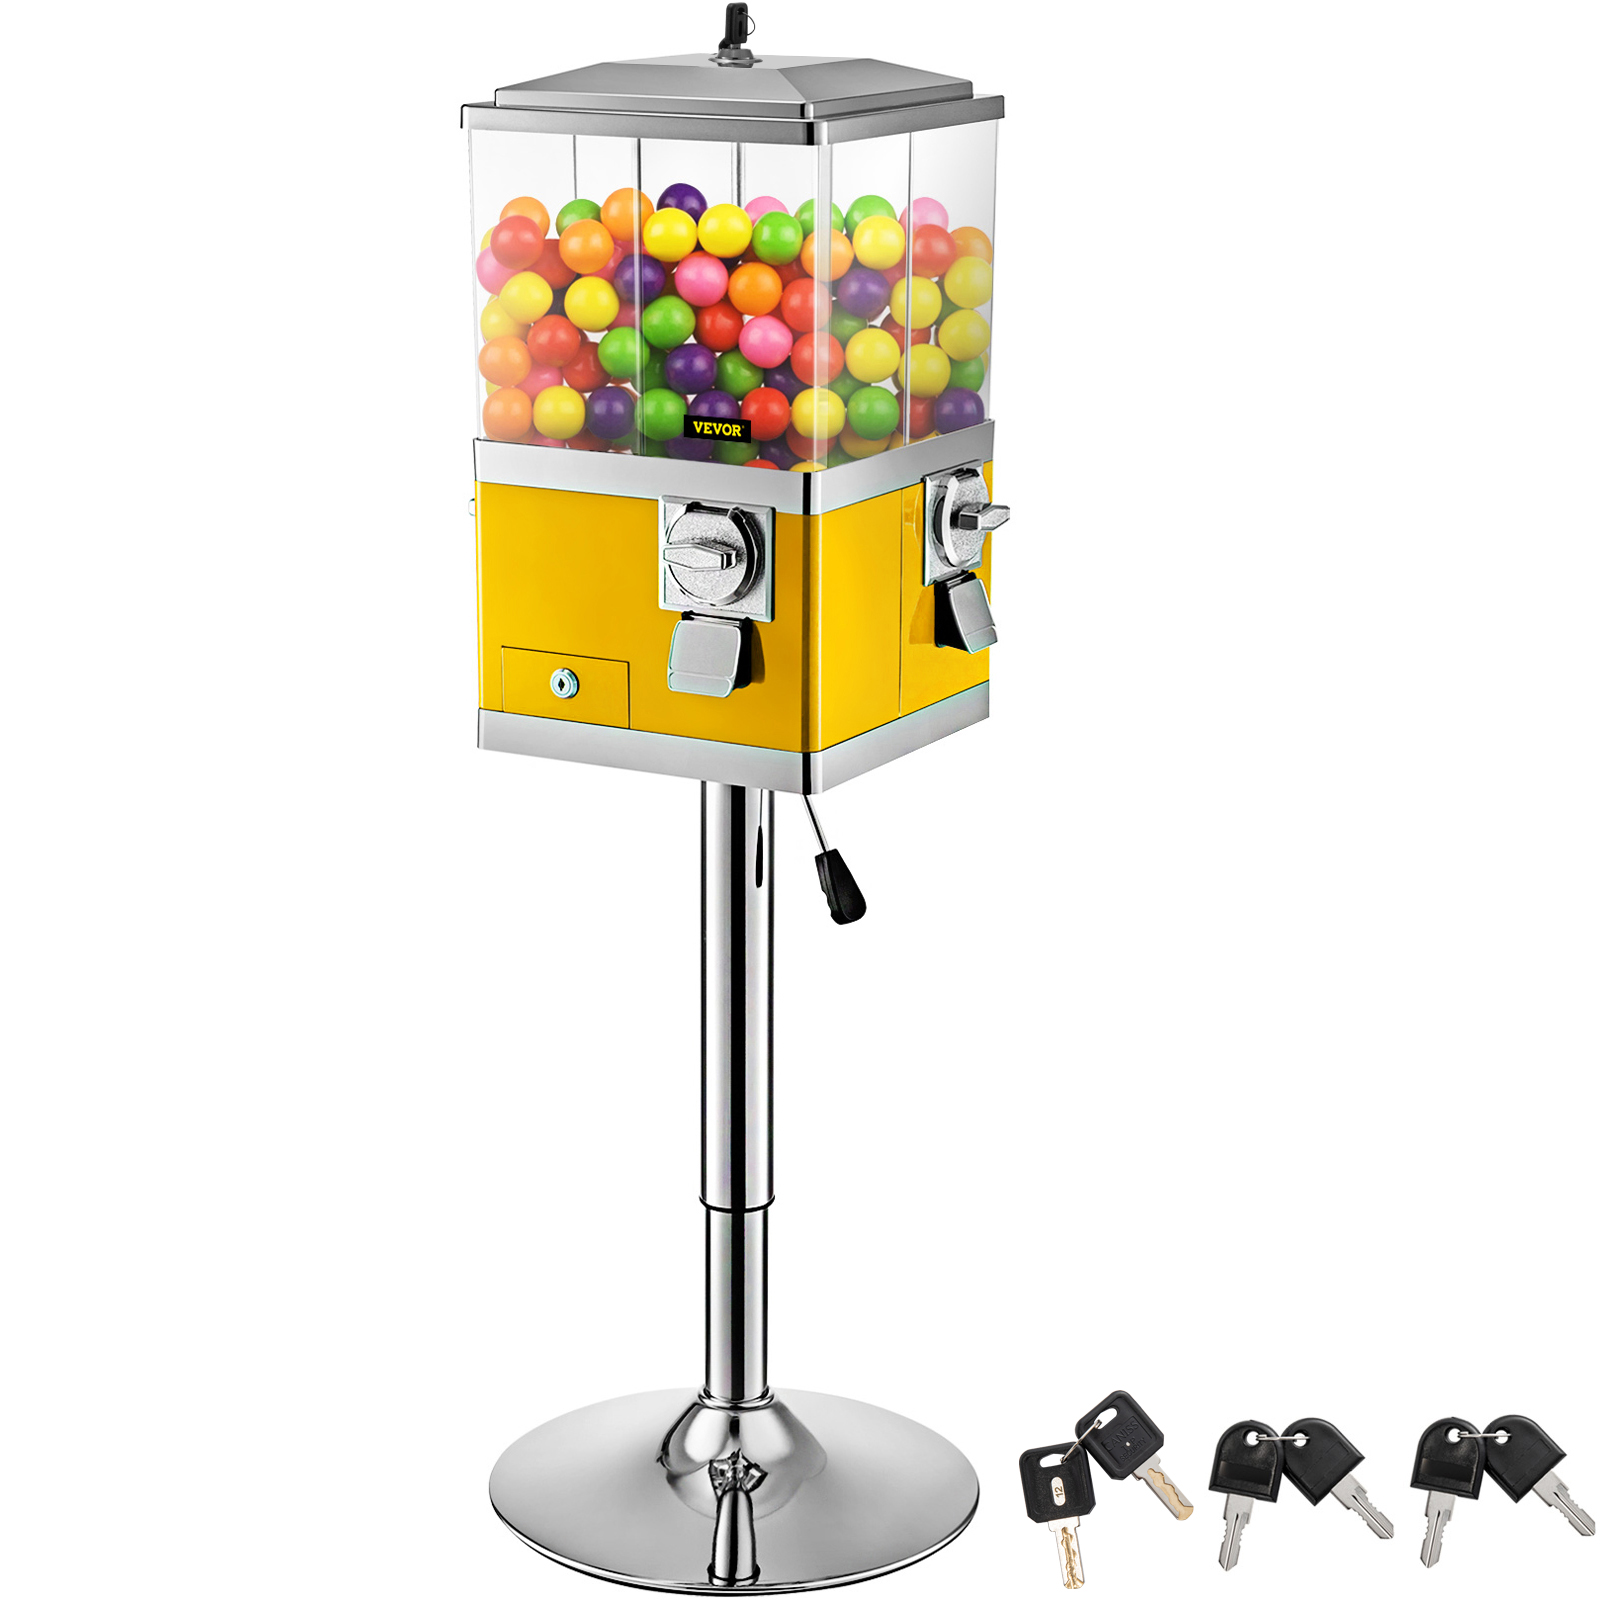 Vevor Gumball Machine Vintage Candy Dispenser With Iron Stand 41-50" Tall Yellow от Vevor Many GEOs